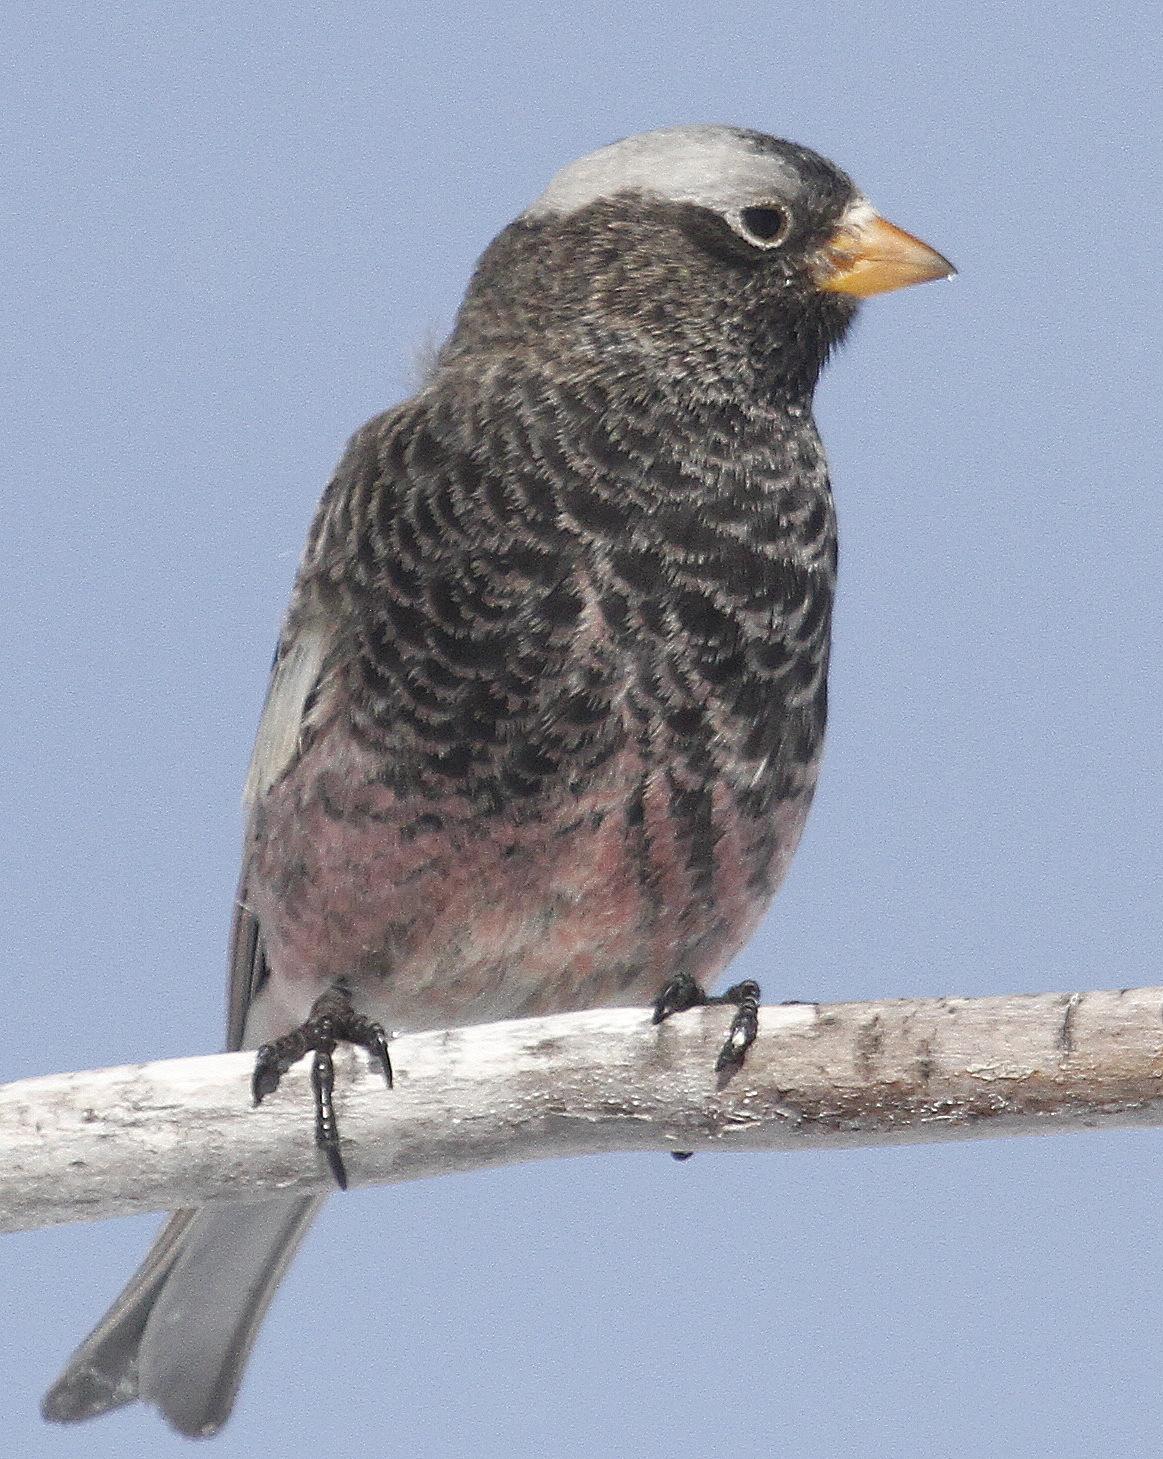 Black Rosy-Finch Photo by Isaac Sanchez